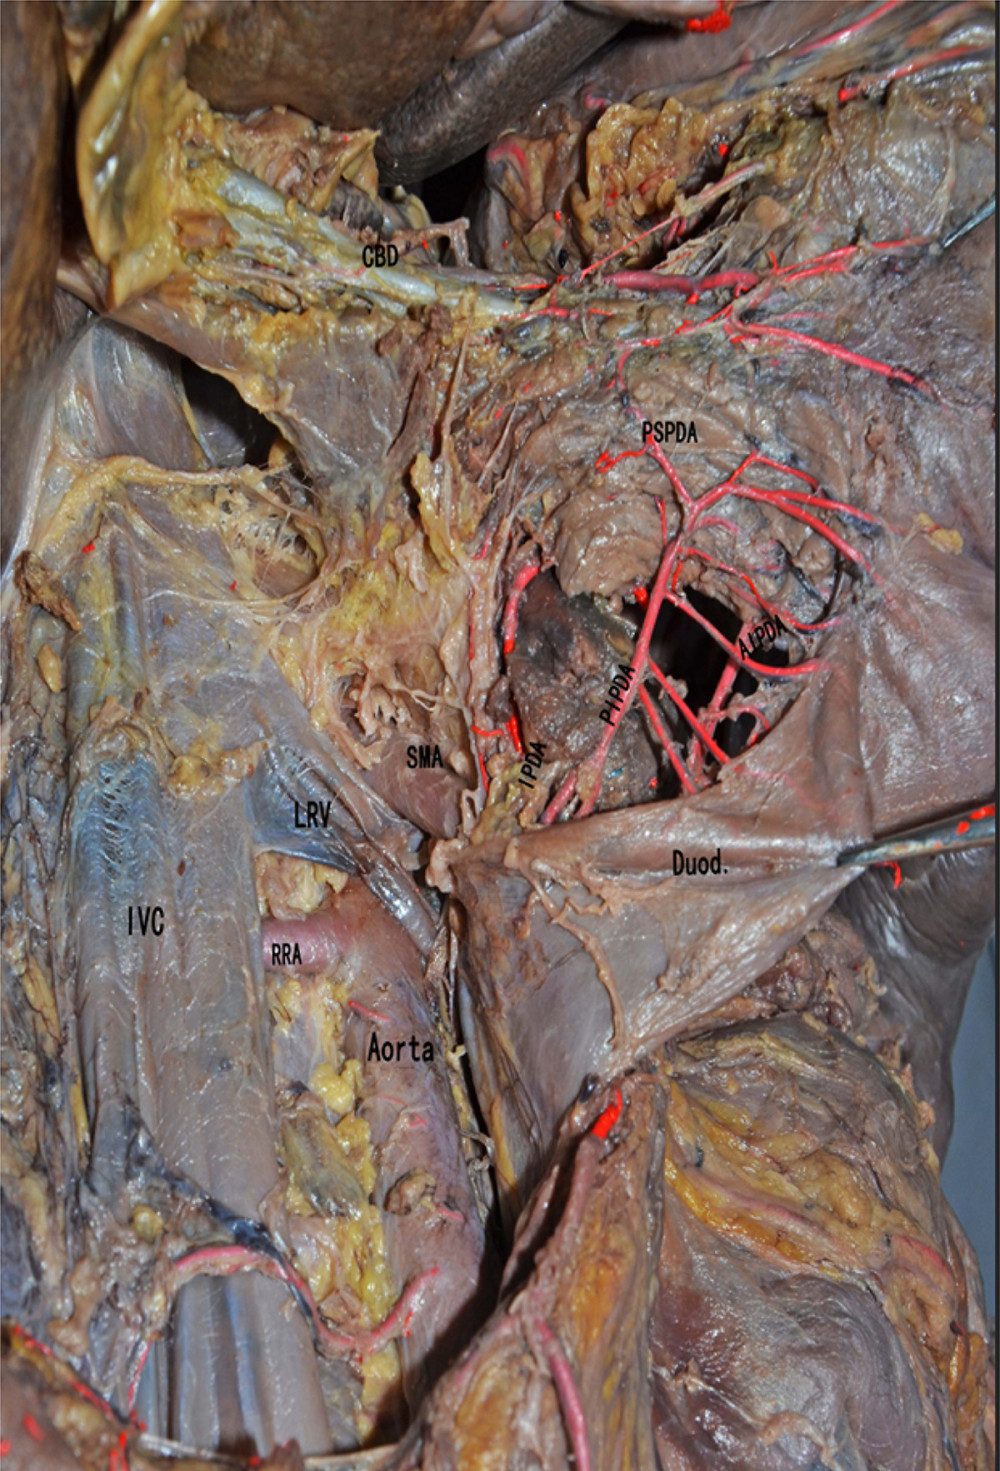 The anatomical diagram of extrahepatic duct blood supply (posterior view). The vascular network around the hilar bile originates mainly from the branches of the right hepatic artery and the gallbladder artery, and the bile vessel network below the common hepatic duct is more derived from the gastroduodenal artery and its branches including the posterior superior pancreaticoduodenal artery and the anterior superior pancreaticoduodenal artery. IVC – inferior vena cava; LRV – left renal vein; RRA – right renal artery.